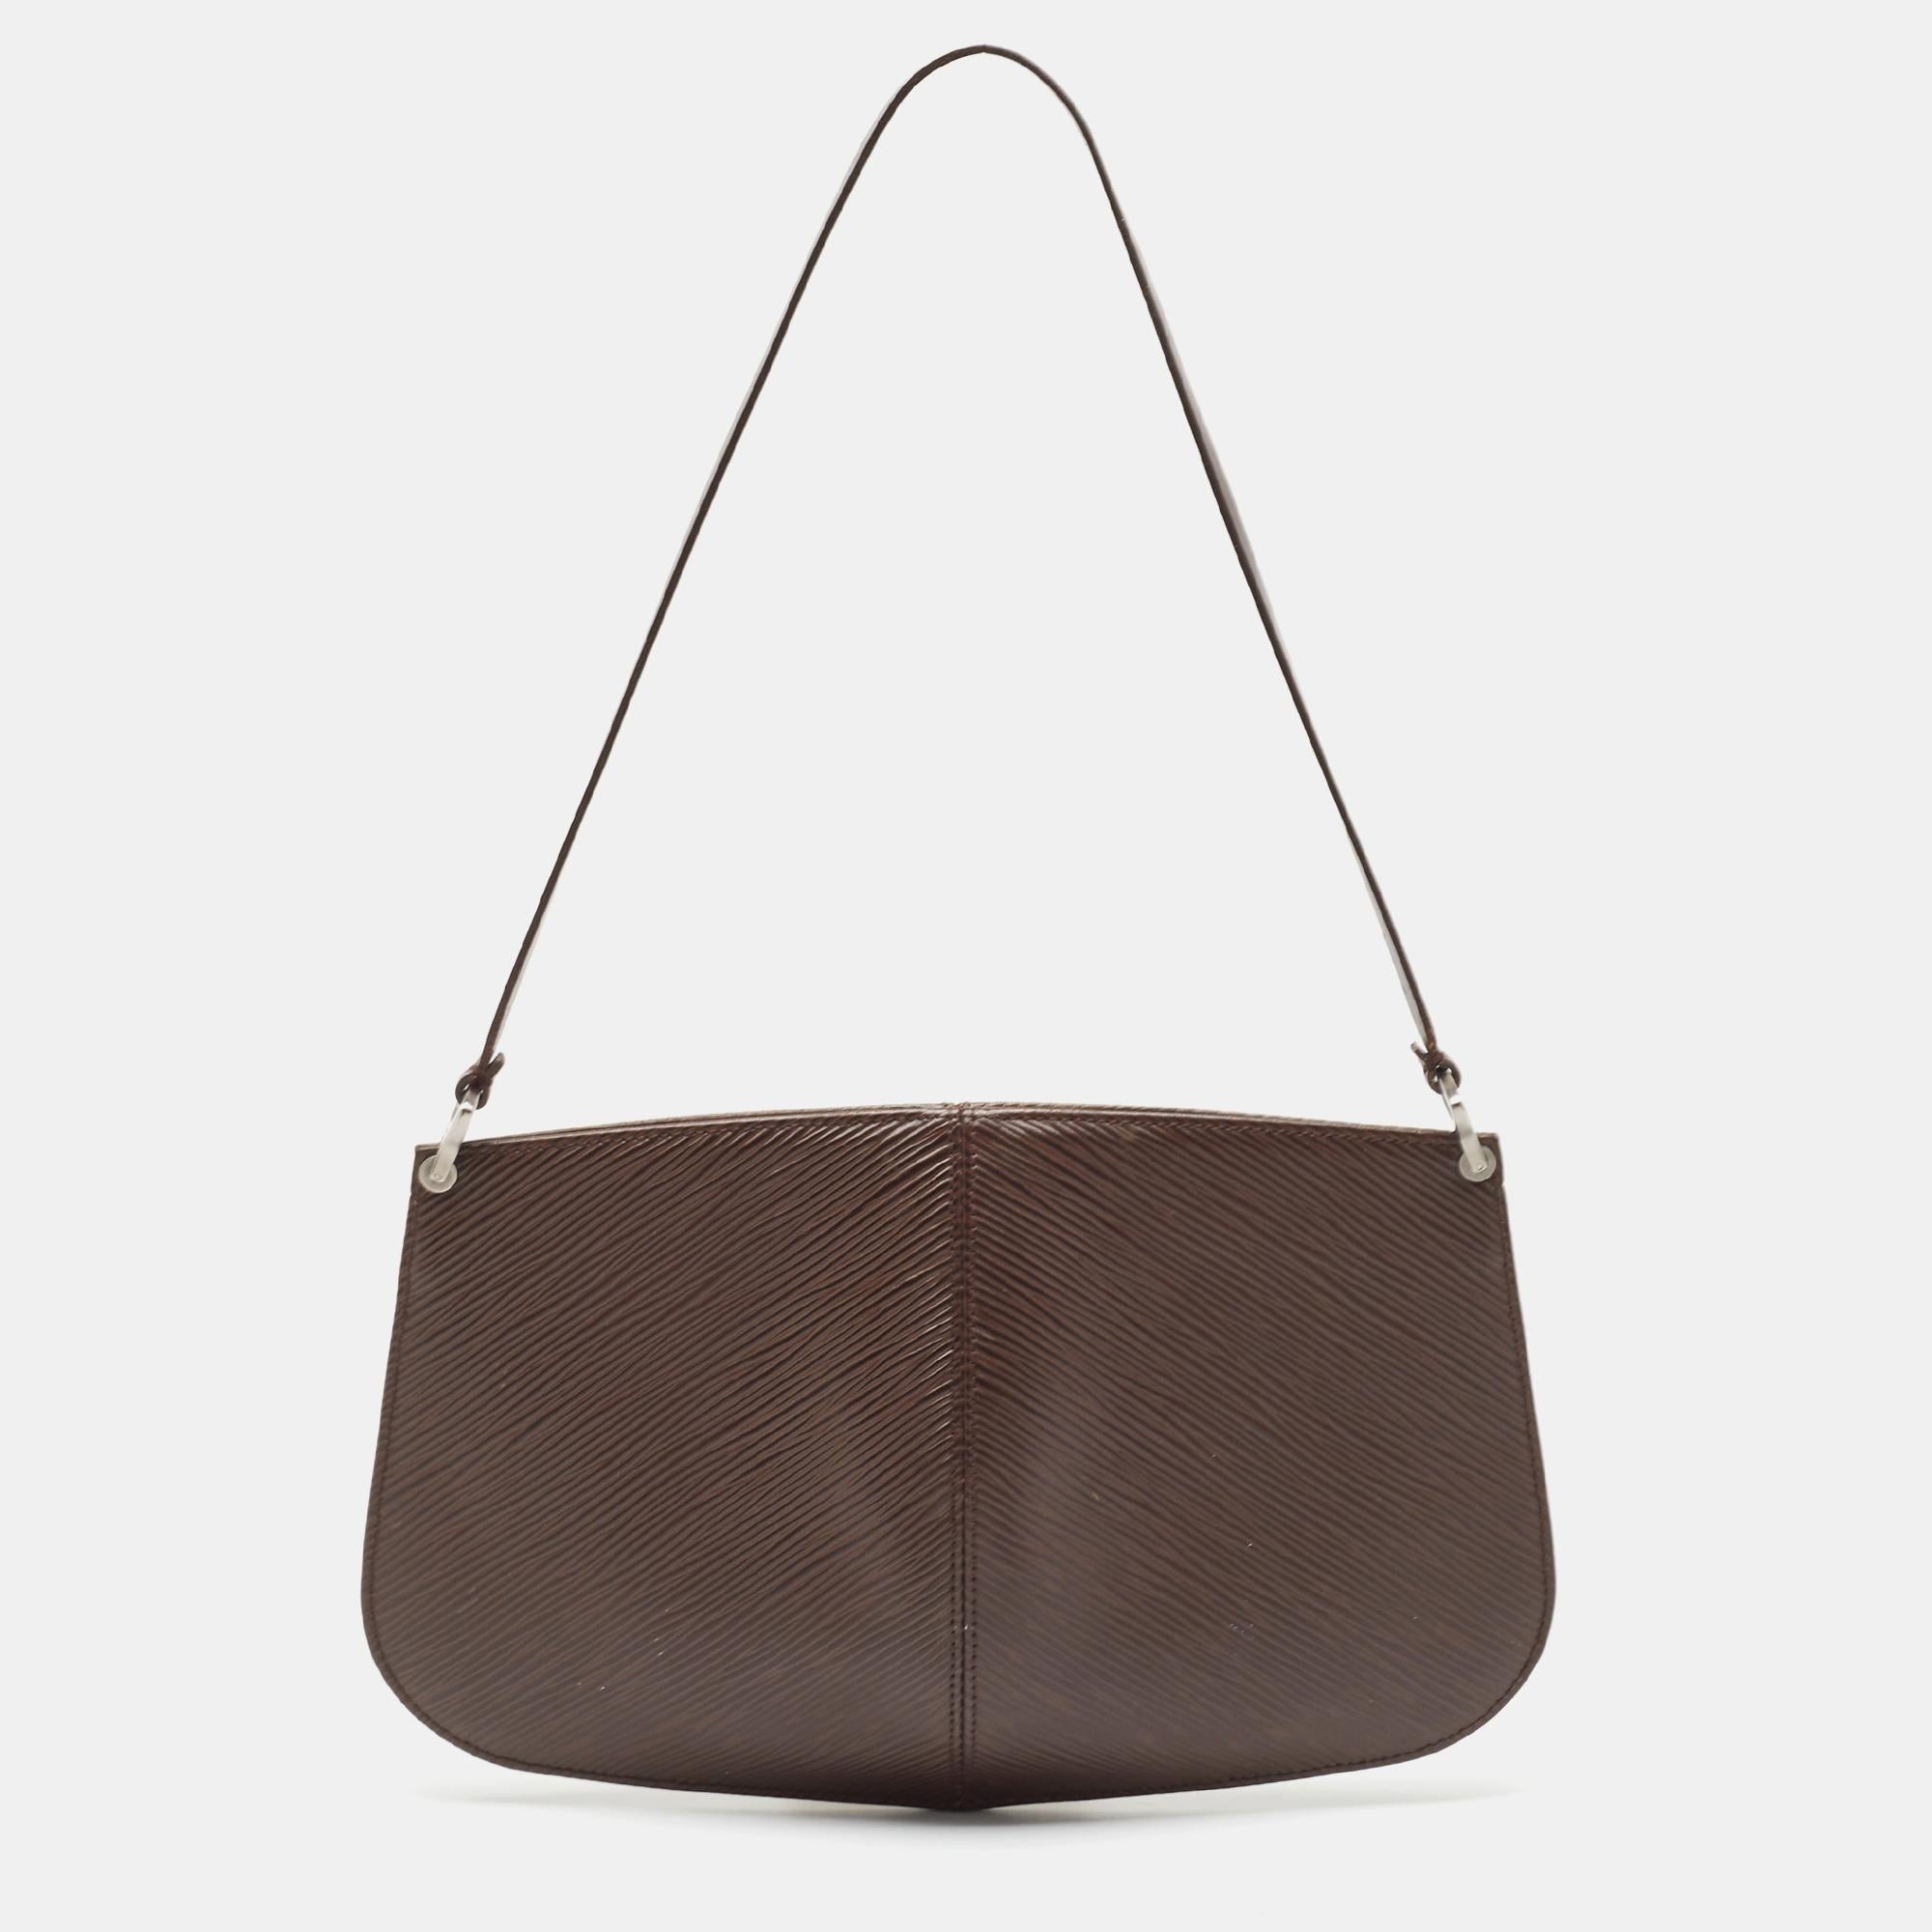 Simple yet stylish, this Demi Lune pochette bag is by Louis Vuitton. Crafted from their Epi leather in a Moka shade, the bag is held by a single handle. It is perfect for everyday use.

